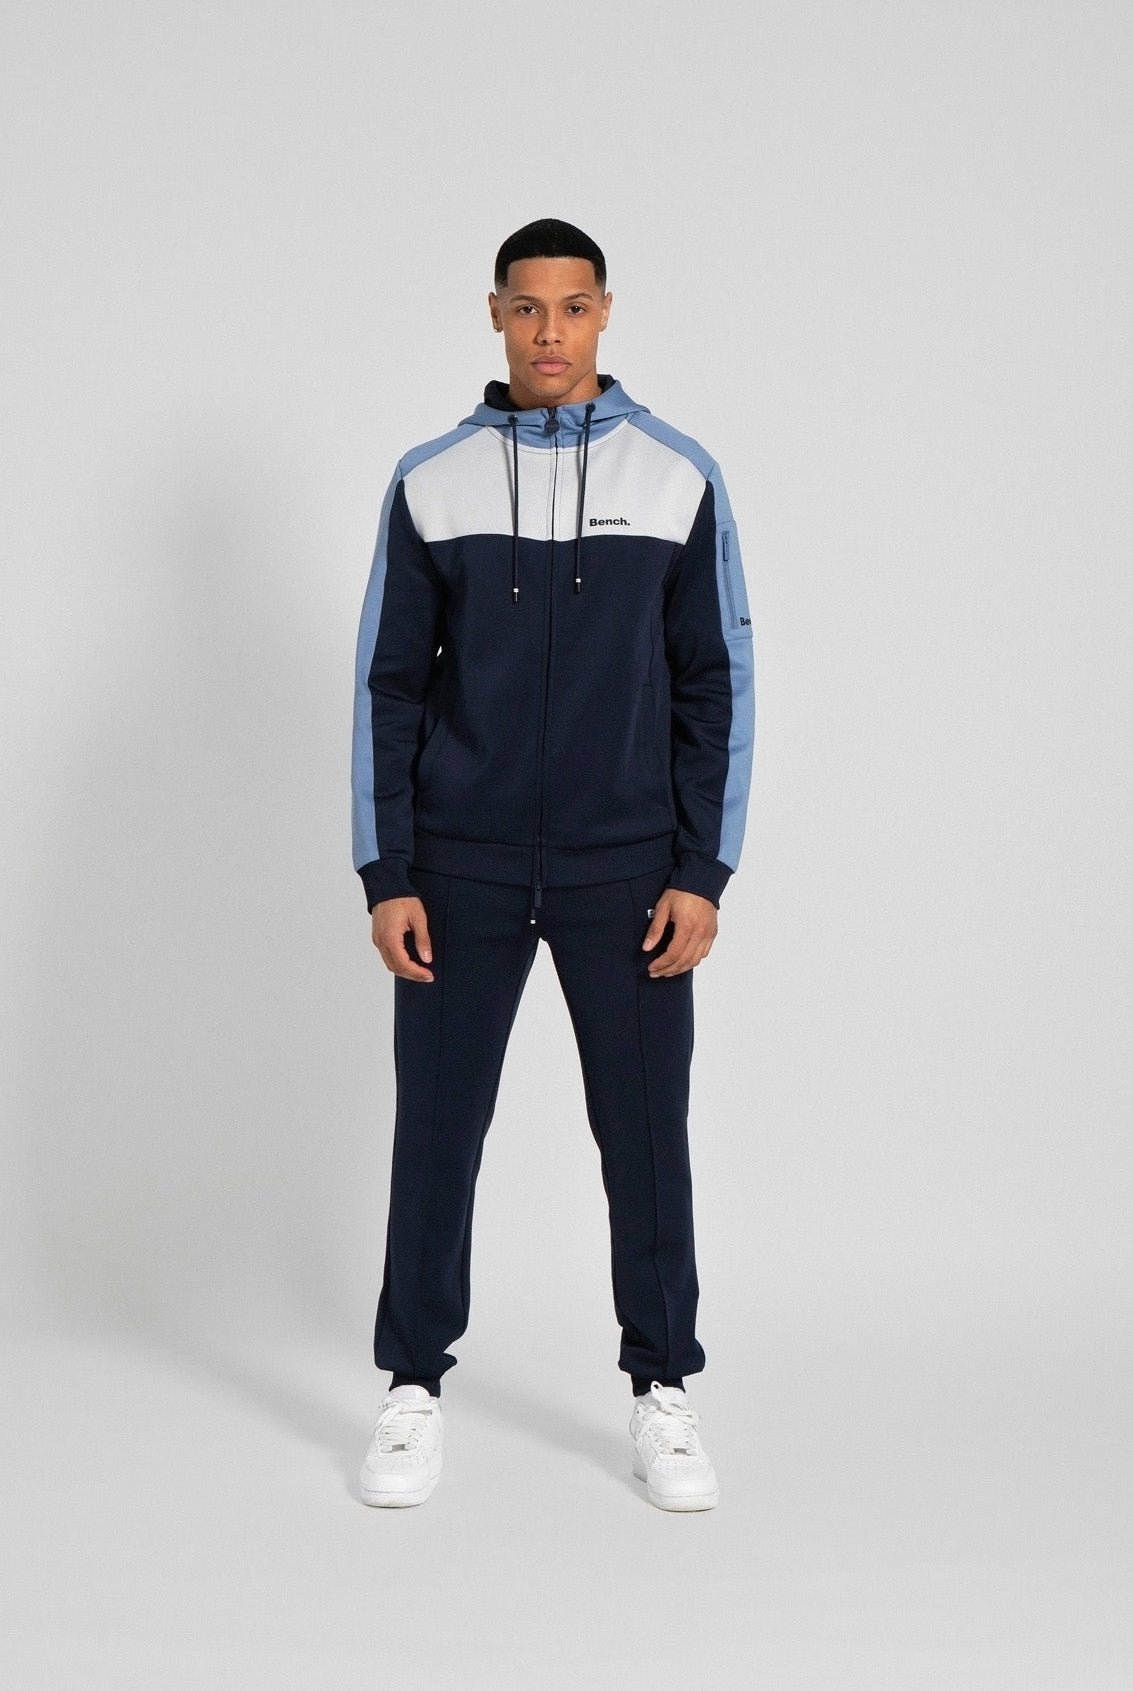 Mens 'RONTELL' 2pc Tracksuit - NAVY - Shop at www.Bench.co.uk #LoveMyHood